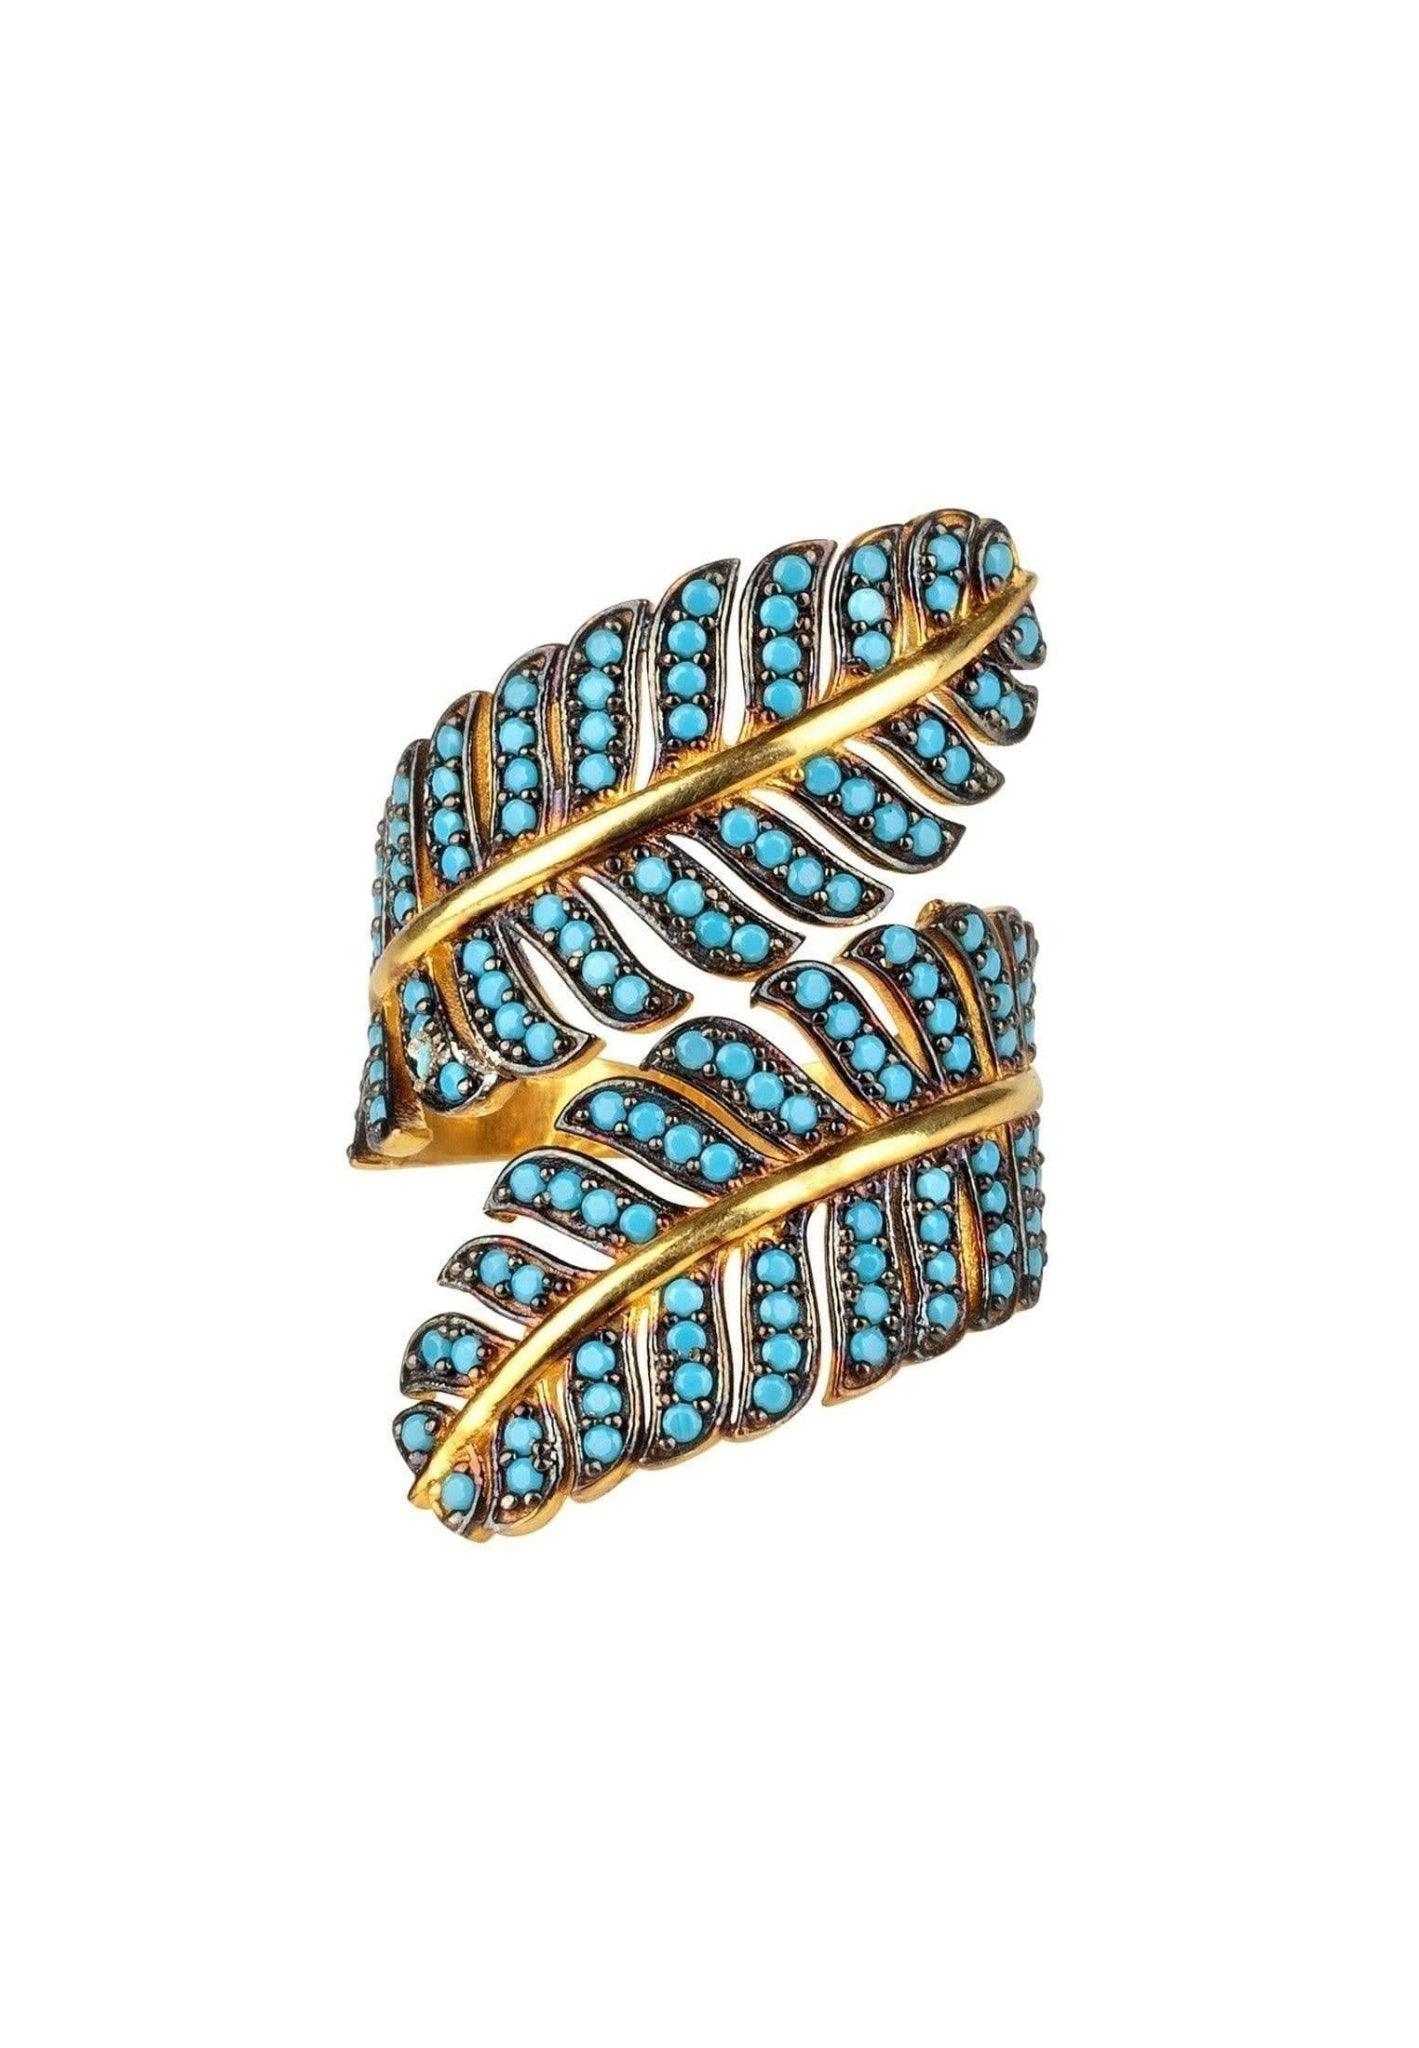 Tropical Leaf Cocktail Ring Turquoise-blue CZ Gold Plated